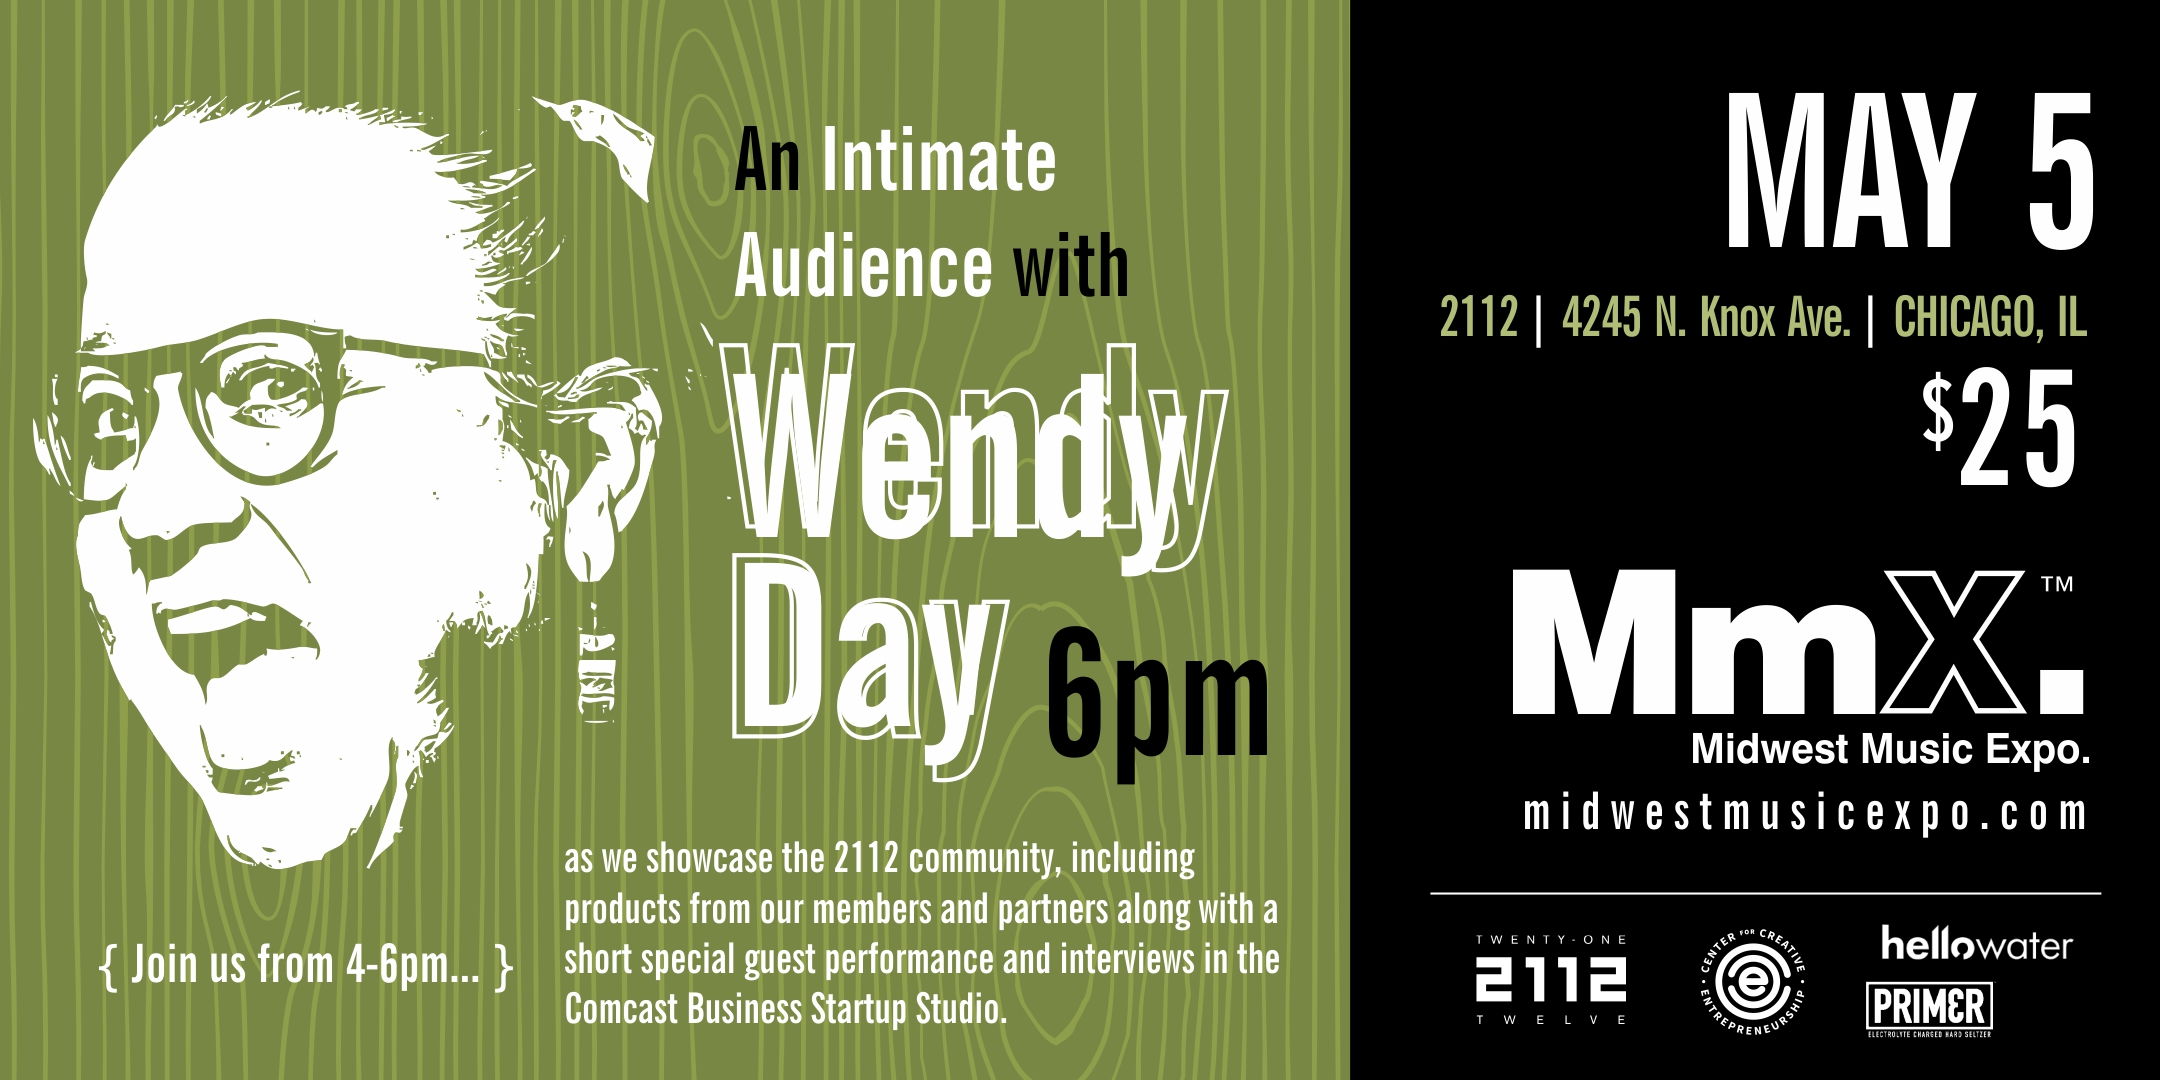 Midwest Music Expo and 2112 Present: An Intimate Audience with Wendy Day